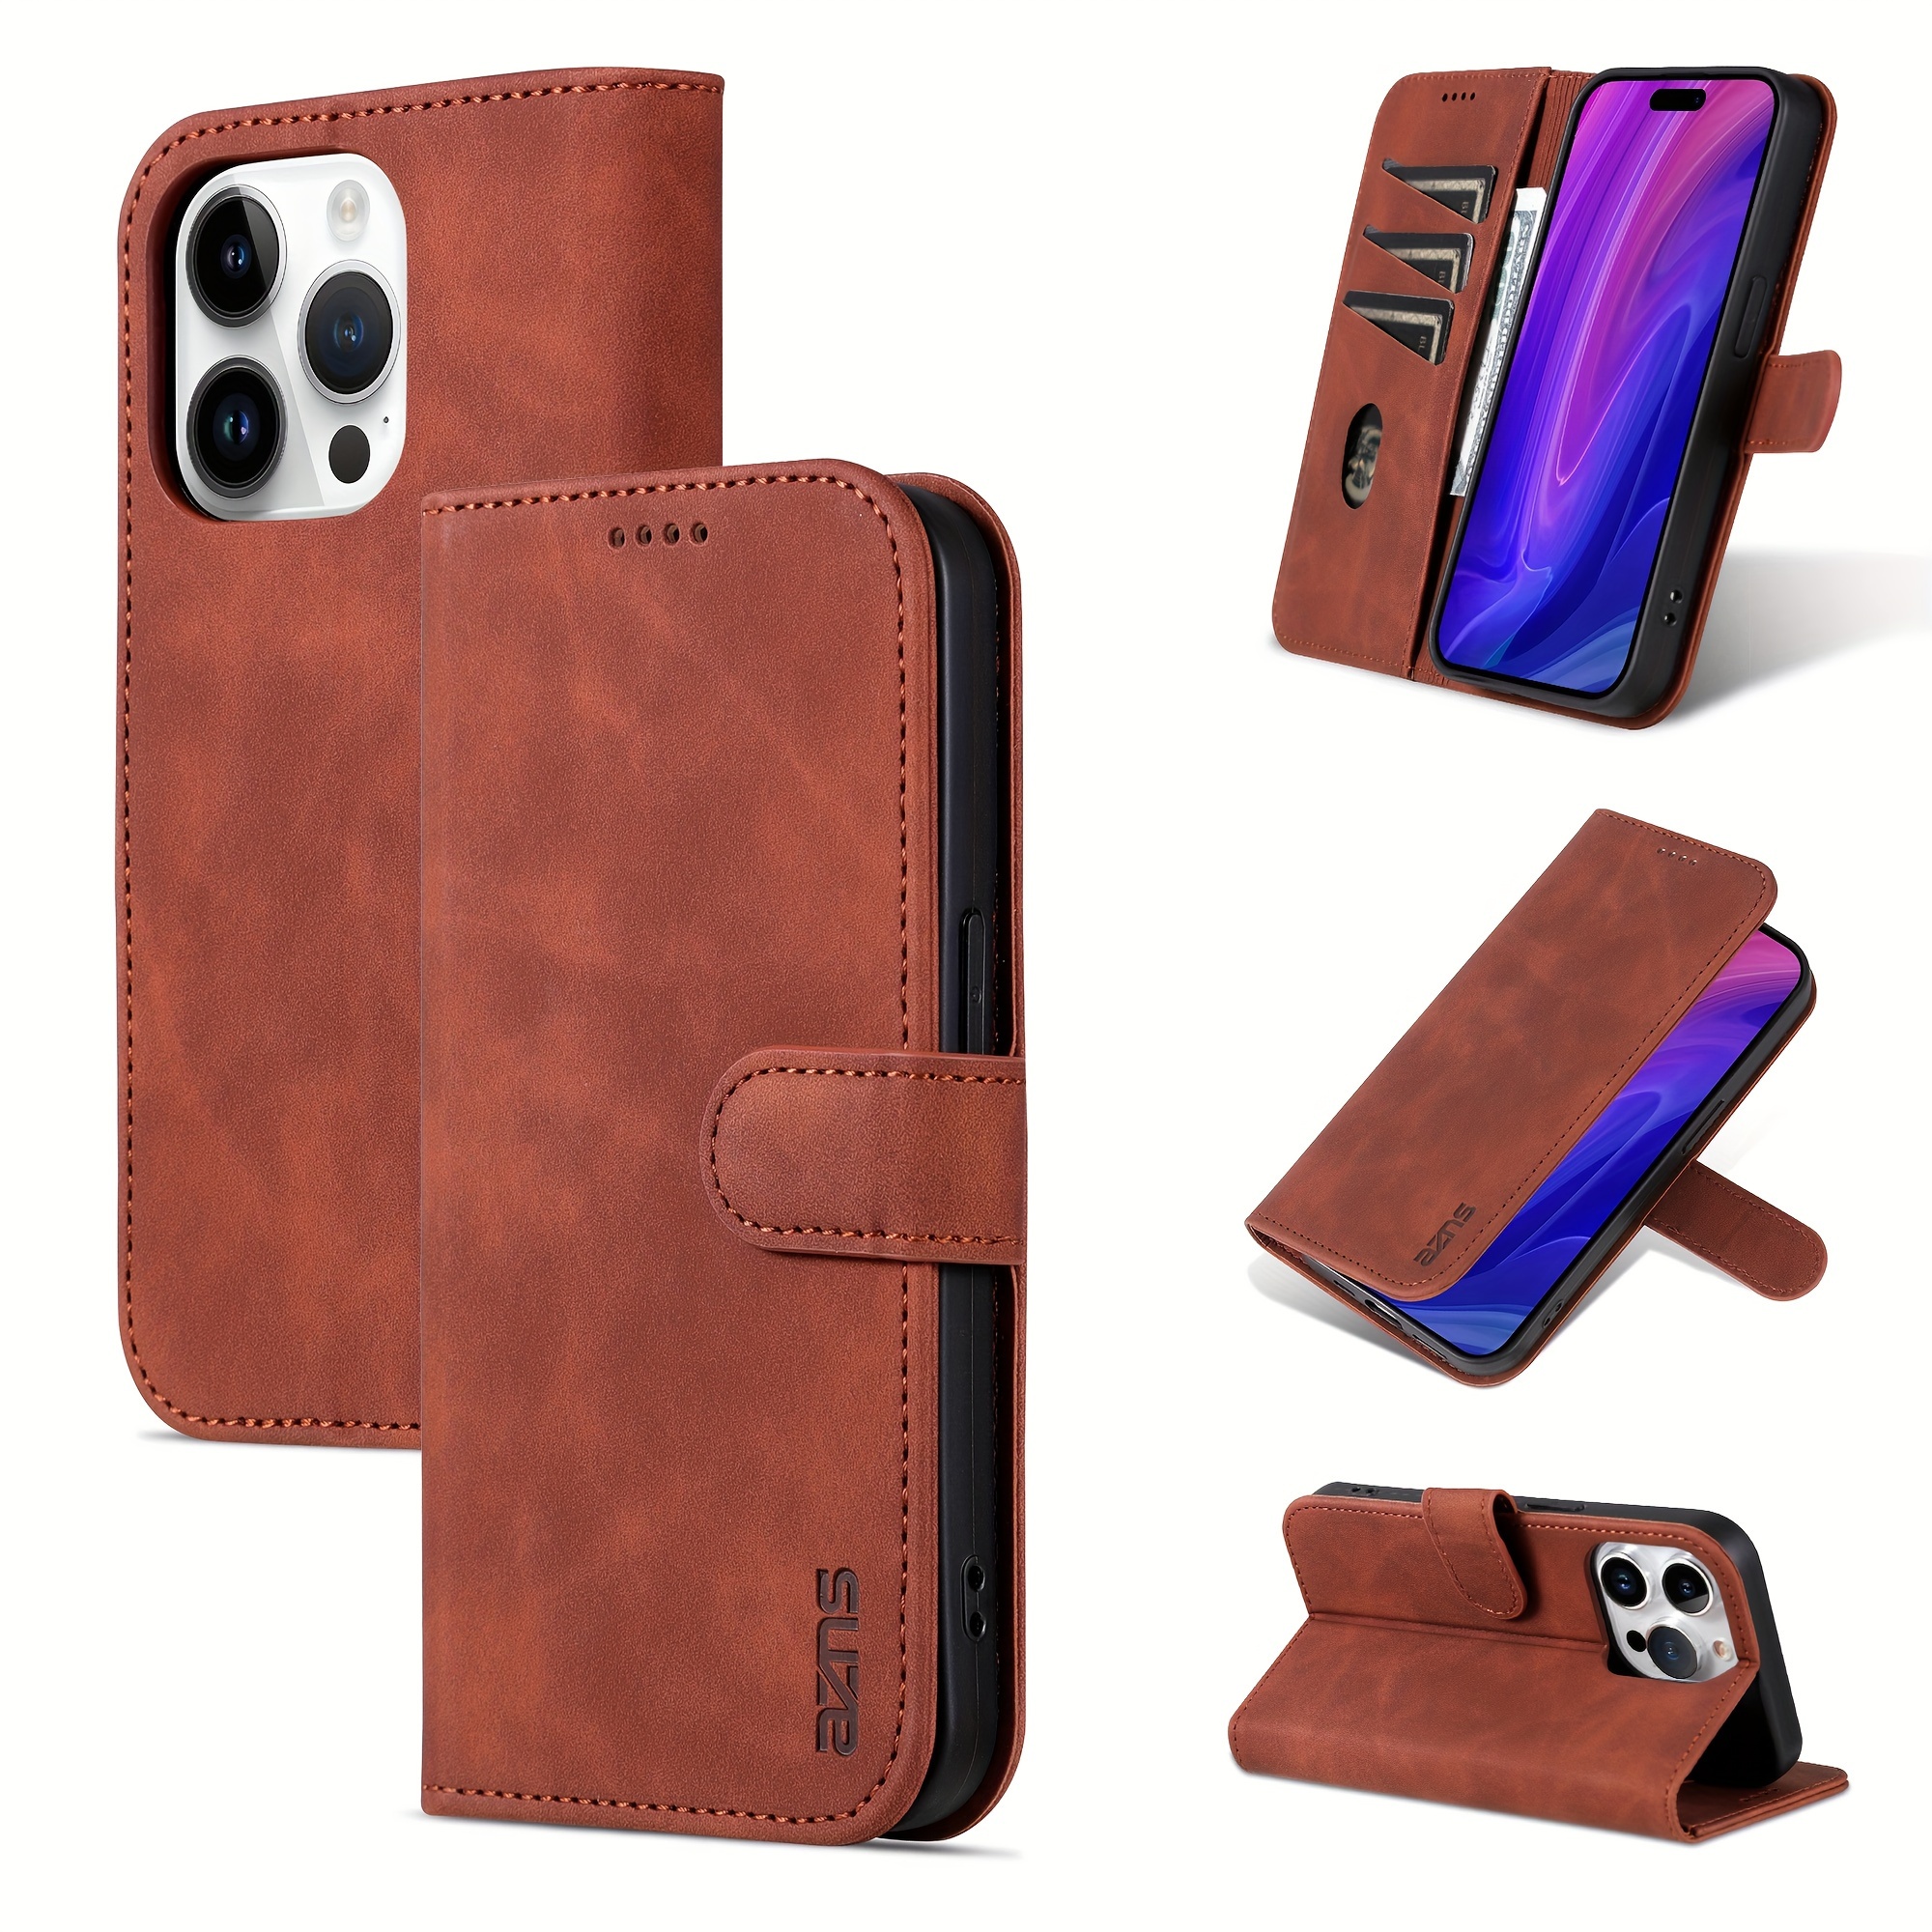 

Premium Leather Wallet Case For 15 Pro Max, 14 Pro, 11 Pro, 7/8 Plus, 13 Pro Max, X/xs/xr, 13/12 Mini - Luxurious Flip Cover With Card Slots, Stand Feature